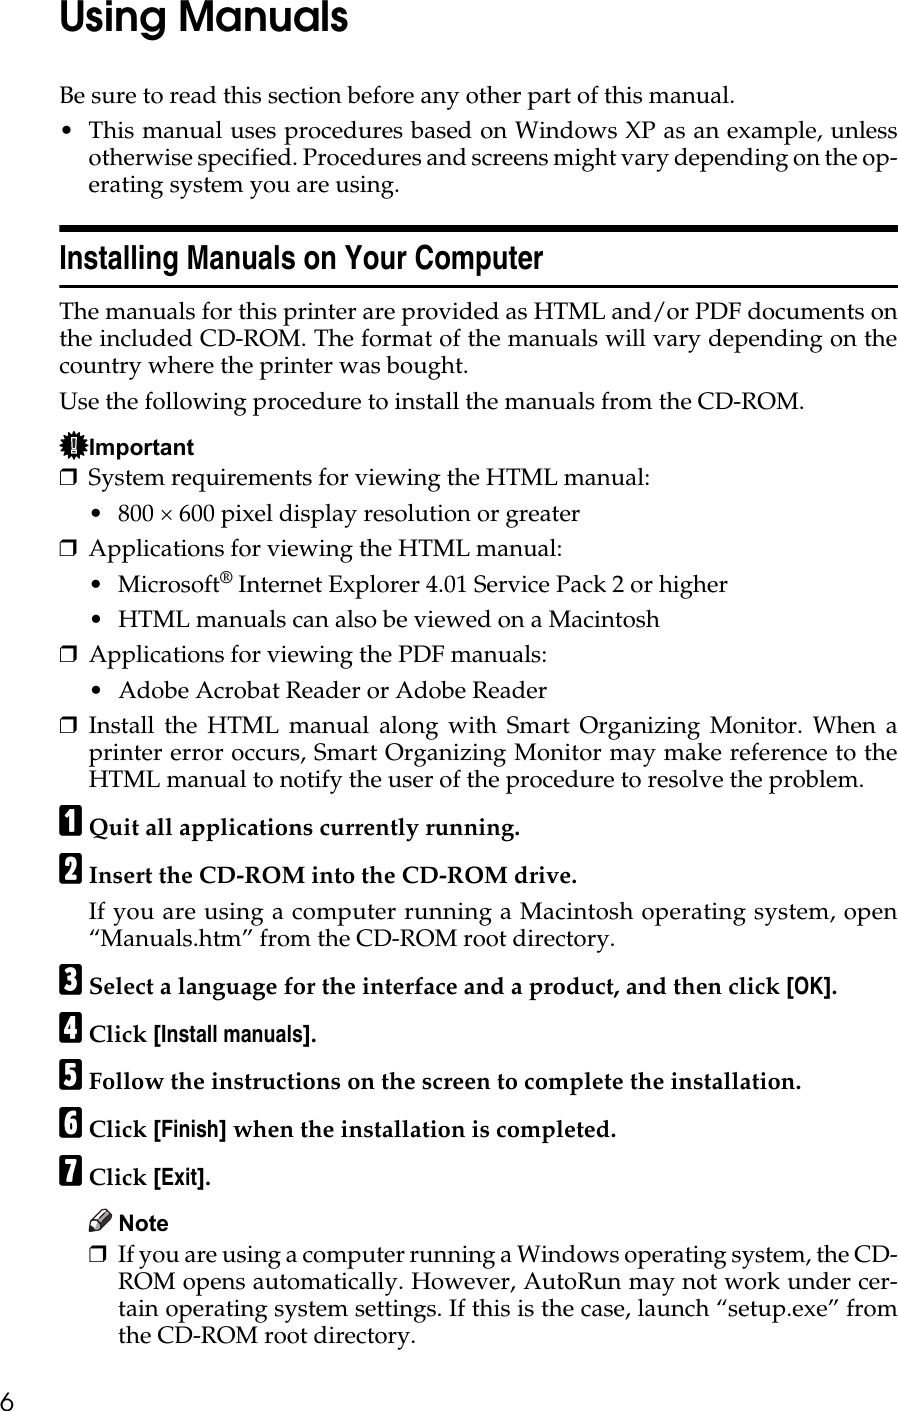 6Using ManualsBe sure to read this section before any other part of this manual.• This manual uses procedures based on Windows XP as an example, unlessotherwise specified. Procedures and screens might vary depending on the op-erating system you are using.Installing Manuals on Your ComputerThe manuals for this printer are provided as HTML and/or PDF documents onthe included CD-ROM. The format of the manuals will vary depending on thecountry where the printer was bought.Use the following procedure to install the manuals from the CD-ROM.Important❒System requirements for viewing the HTML manual:• 800 × 600 pixel display resolution or greater❒Applications for viewing the HTML manual:•Microsoft® Internet Explorer 4.01 Service Pack 2 or higher• HTML manuals can also be viewed on a Macintosh❒Applications for viewing the PDF manuals:• Adobe Acrobat Reader or Adobe Reader❒Install the HTML manual along with Smart Organizing Monitor. When aprinter error occurs, Smart Organizing Monitor may make reference to theHTML manual to notify the user of the procedure to resolve the problem.AQuit all applications currently running.BInsert the CD-ROM into the CD-ROM drive.If you are using a computer running a Macintosh operating system, open“Manuals.htm” from the CD-ROM root directory.CSelect a language for the interface and a product, and then click [OK].DClick [Install manuals].EFollow the instructions on the screen to complete the installation.FClick [Finish] when the installation is completed.GClick [Exit].Note❒If you are using a computer running a Windows operating system, the CD-ROM opens automatically. However, AutoRun may not work under cer-tain operating system settings. If this is the case, launch “setup.exe” fromthe CD-ROM root directory.